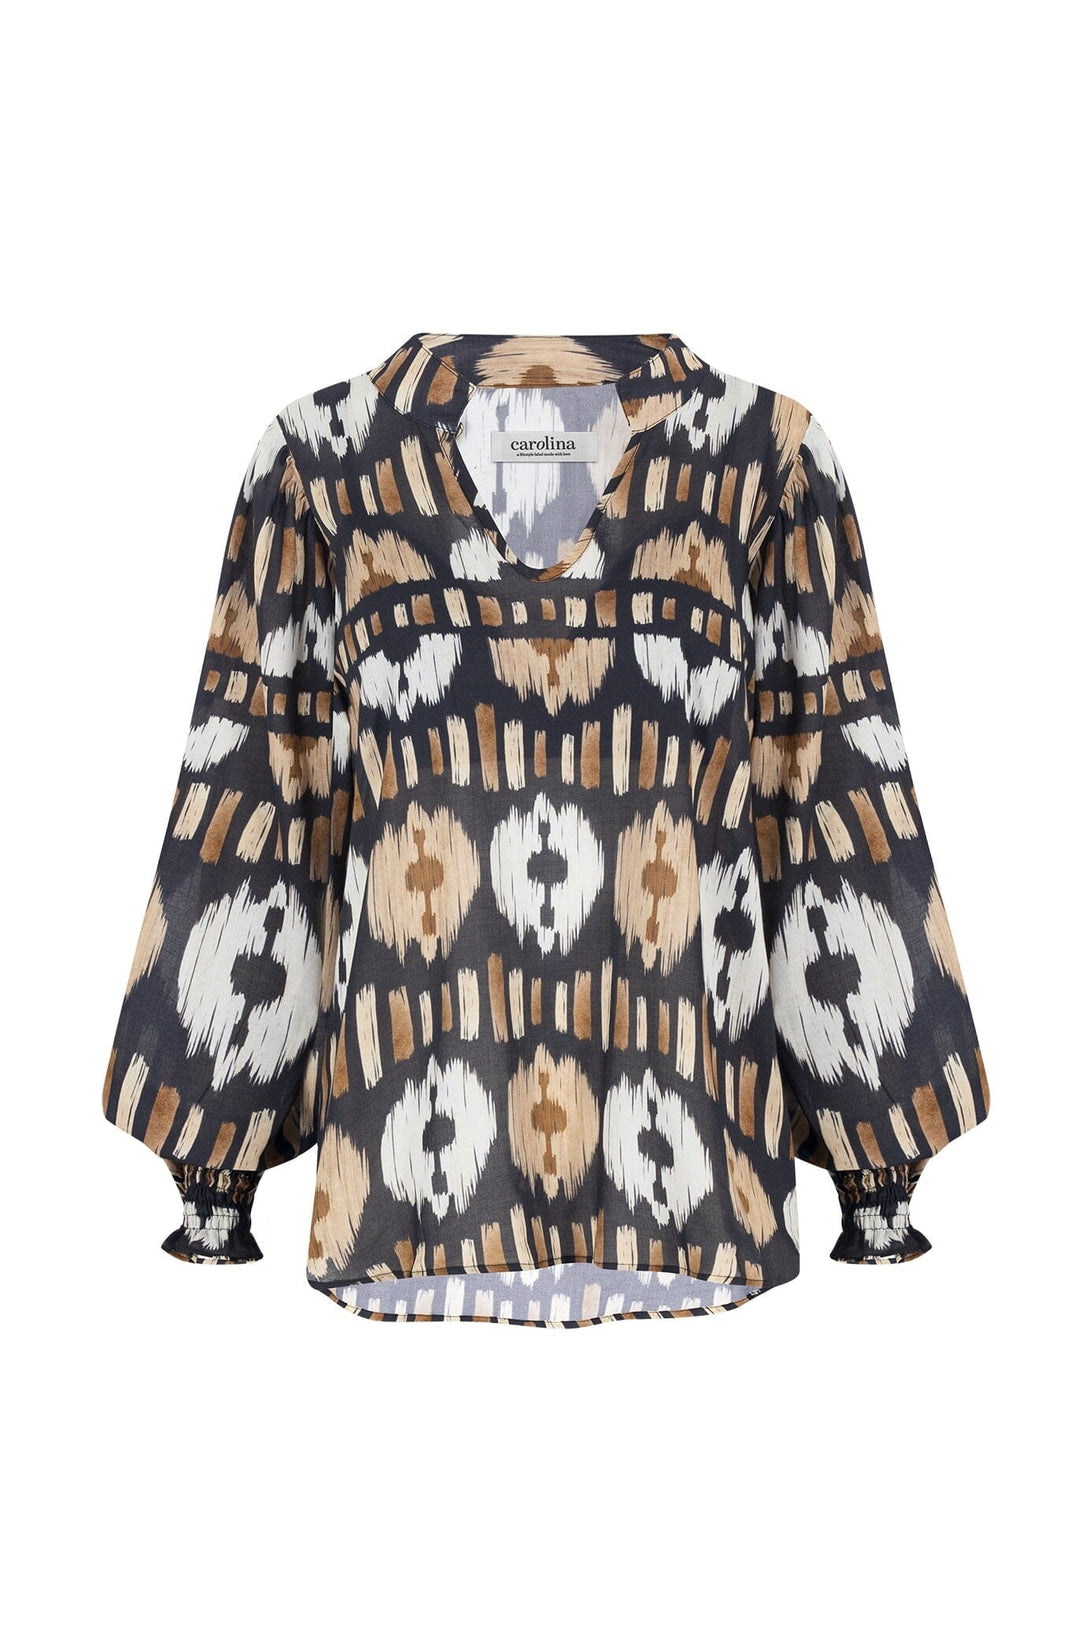 Tyla Print Long Sleeve Top Black and Camel Tops